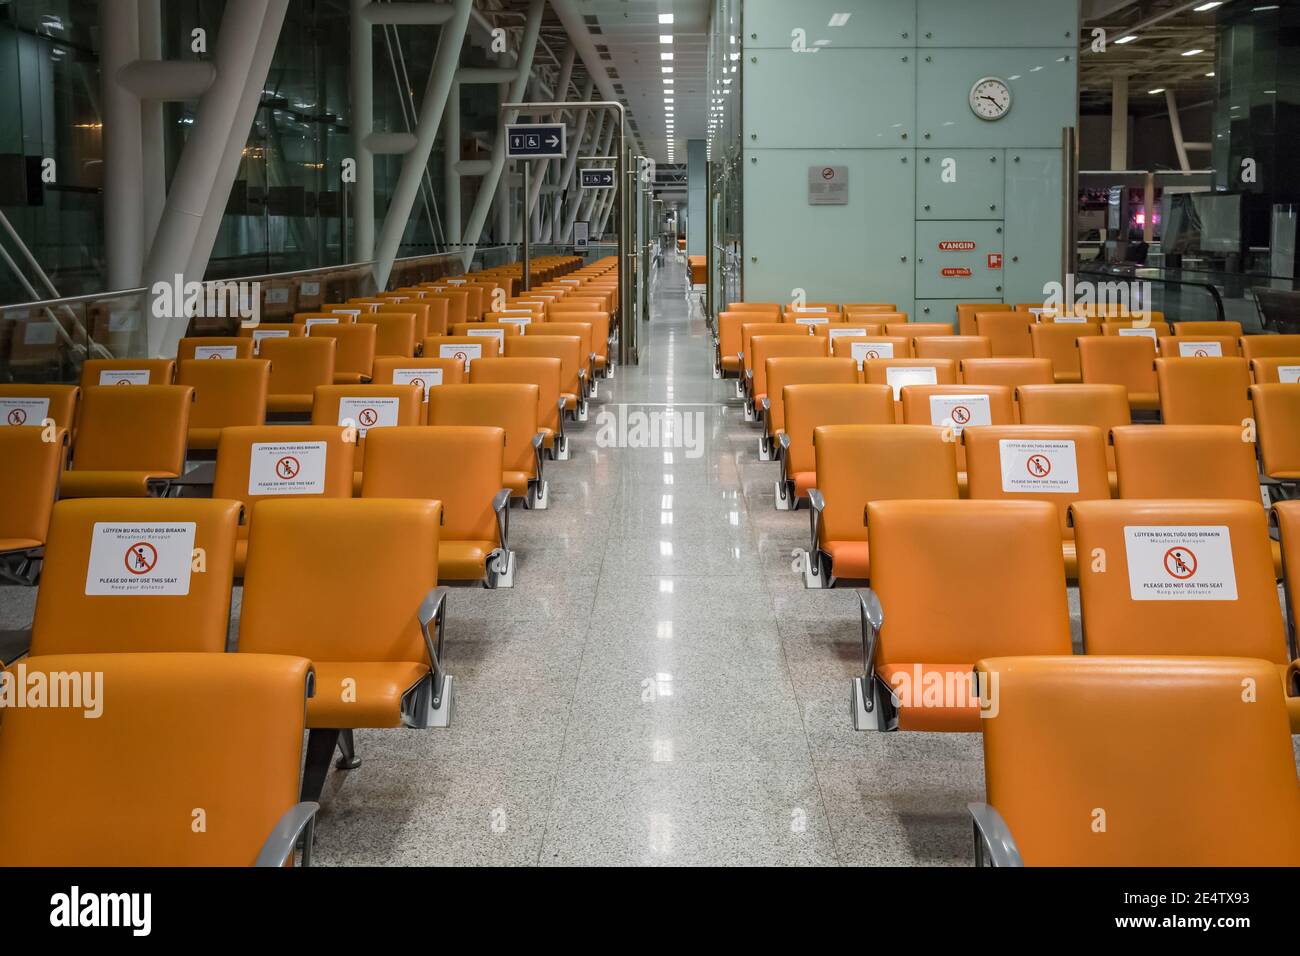 Signs on the chairs reminding about importance of social distancing during pandemic of Covid-19 Stock Photo